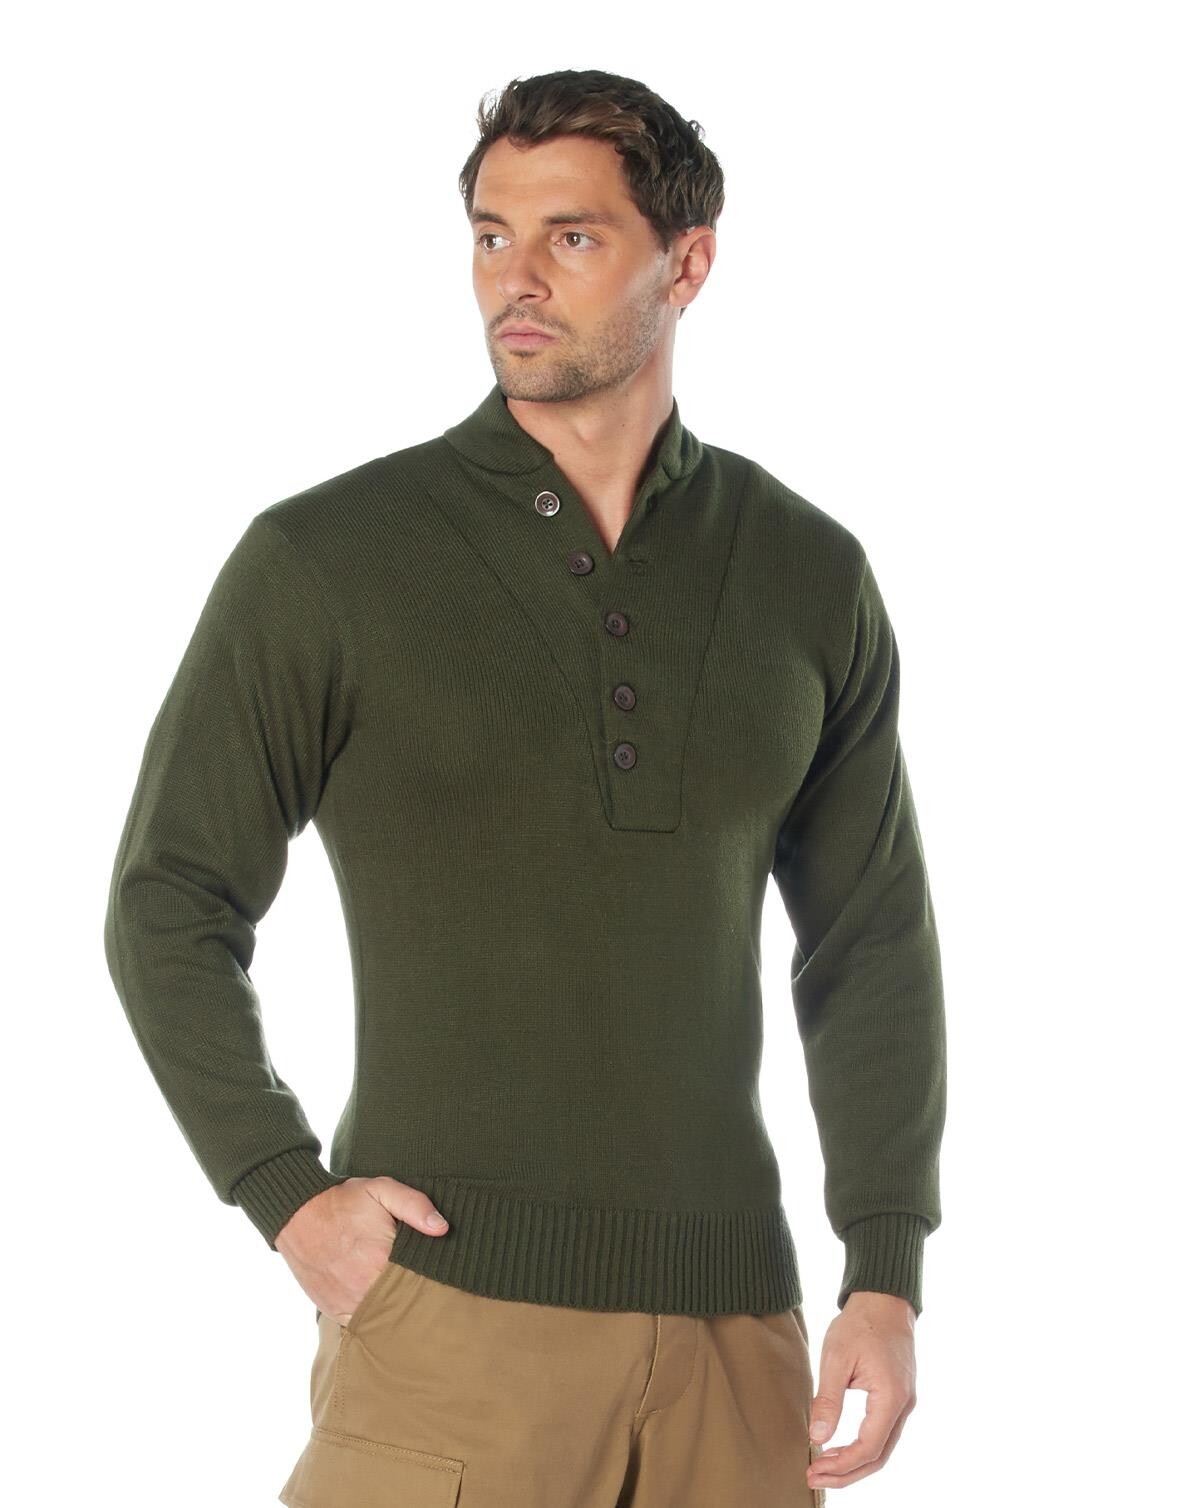 #2 - Rothco 5-button U.S. Sweater (Oliven, M)